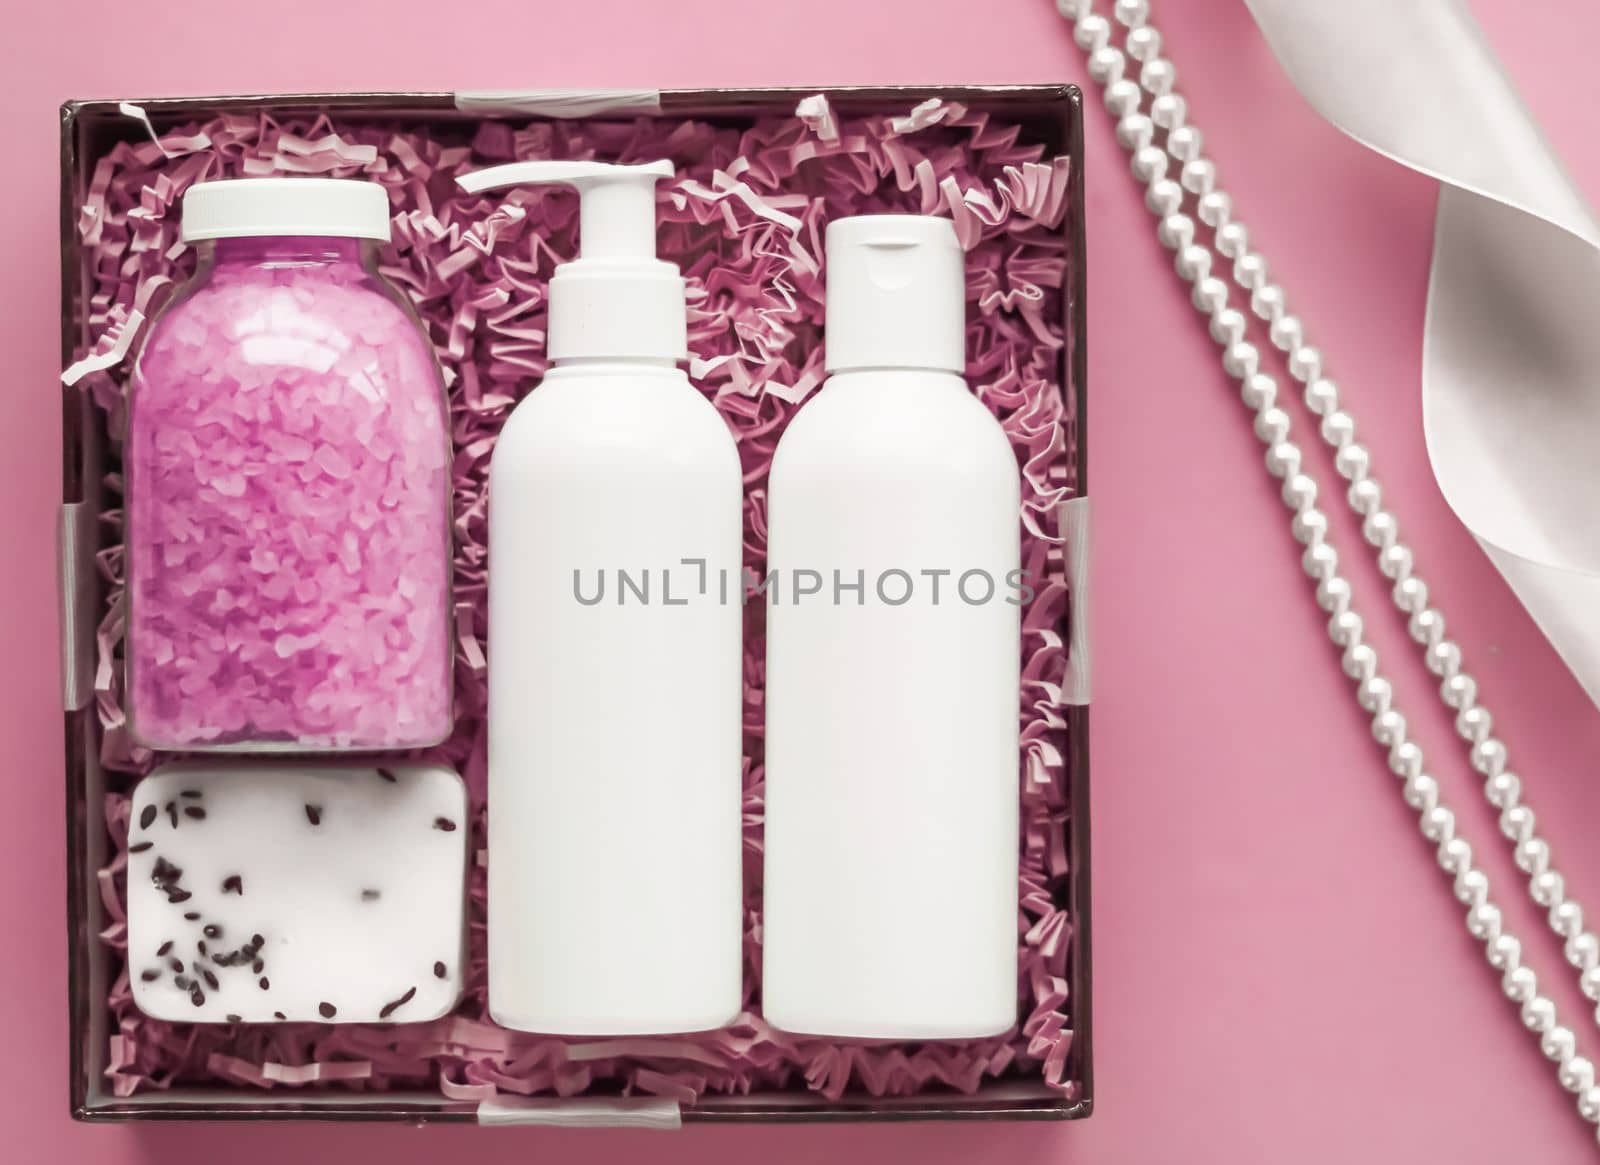 Beauty box subscription package, luxury skincare and body care products, milk lotion, bath salt, soap, shower gel as flat lay on pink background, spa cosmetics as holiday gift, online shopping delivery, flatlay by Anneleven